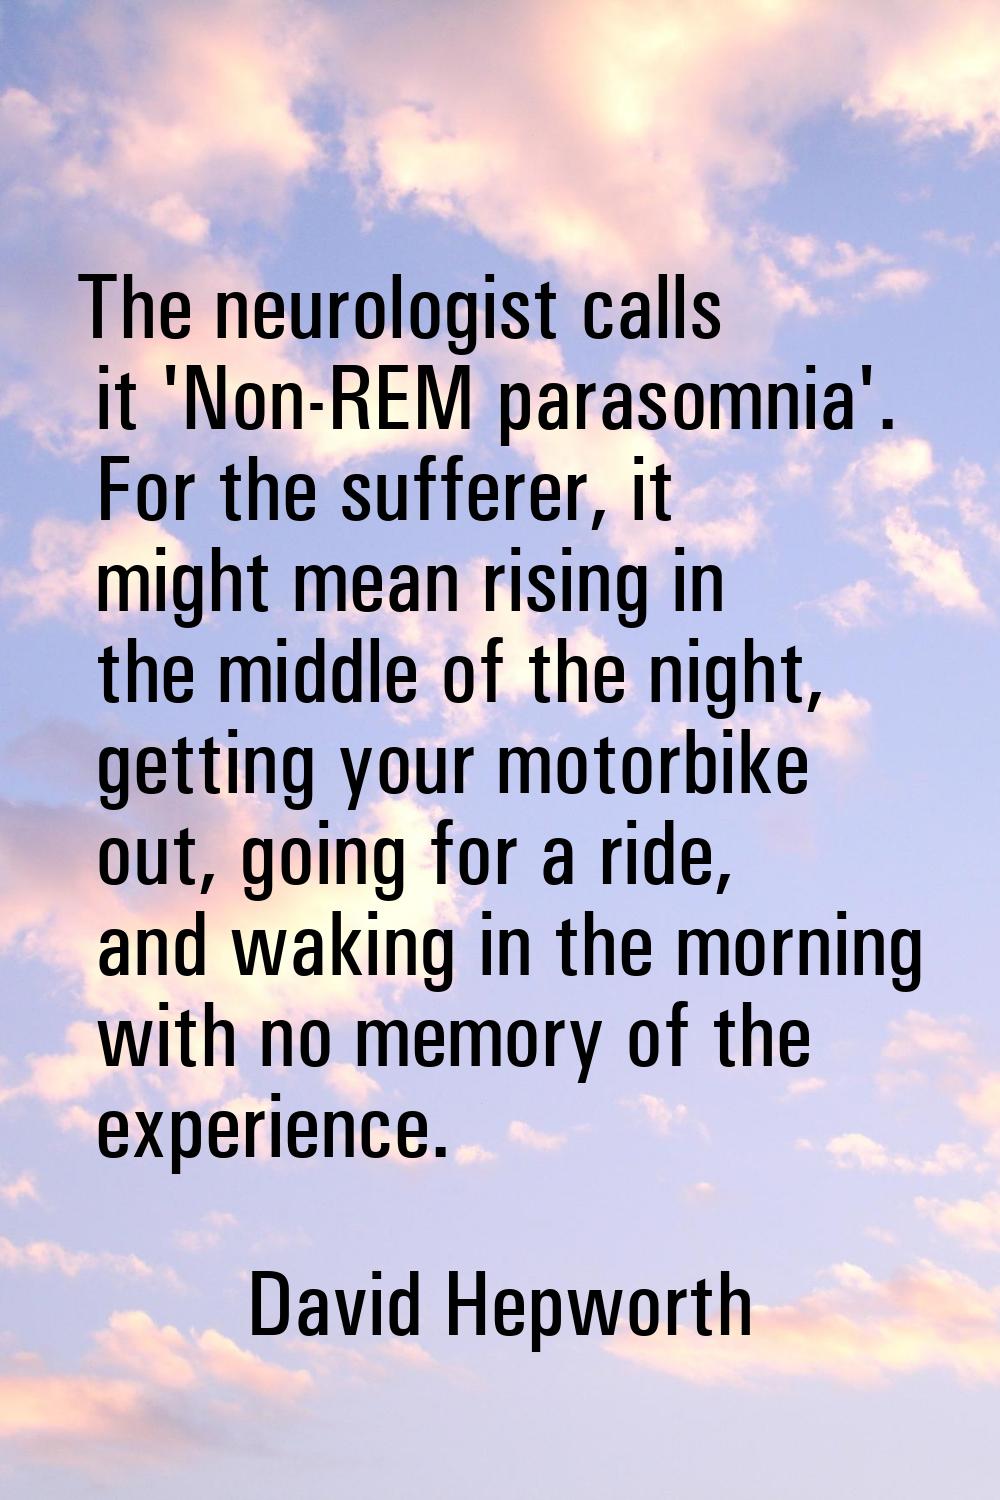 The neurologist calls it 'Non-REM parasomnia'. For the sufferer, it might mean rising in the middle